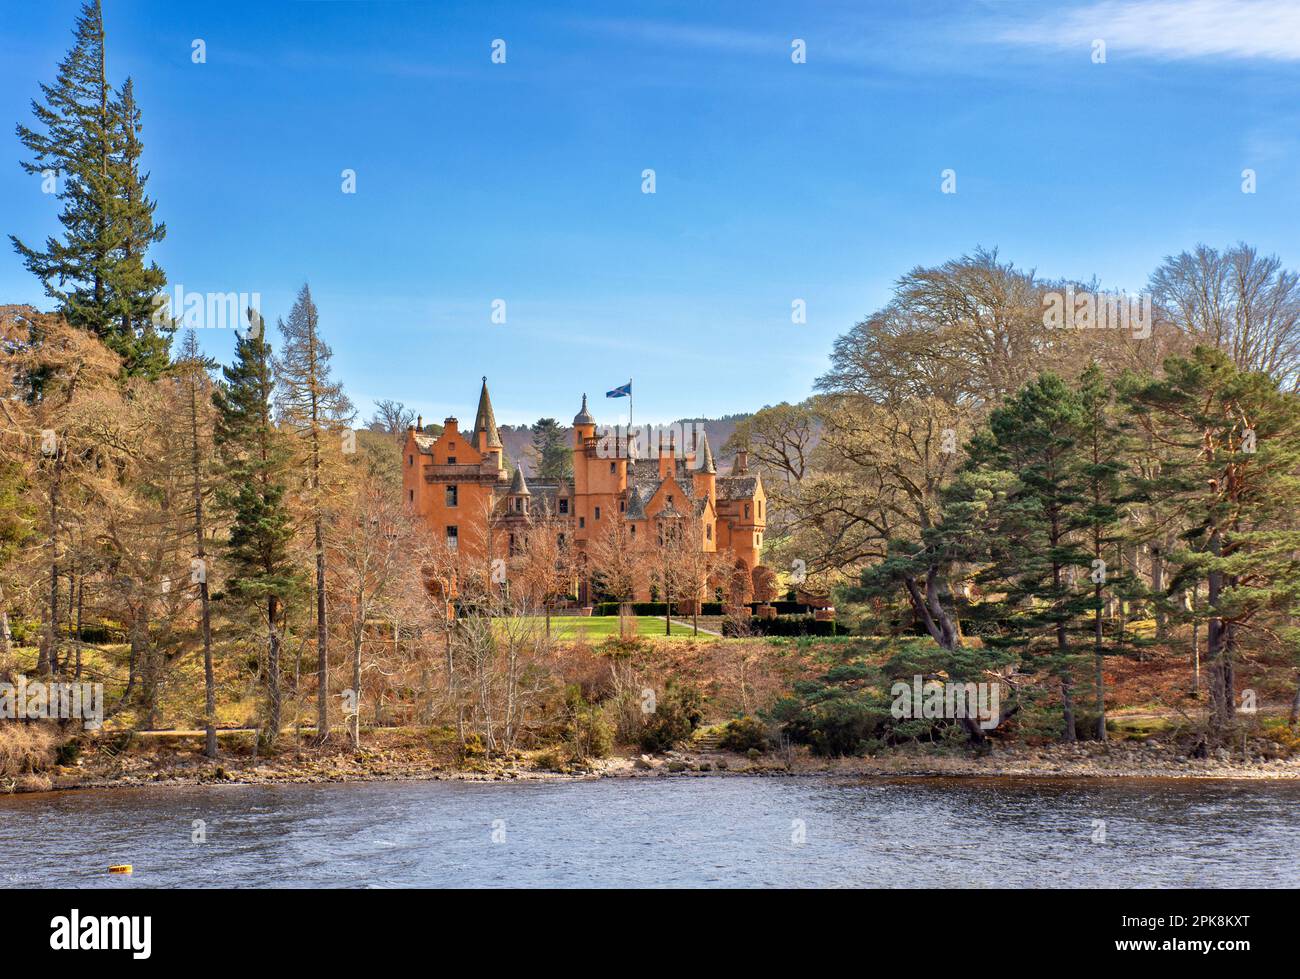 Aldourie Castle Estate Loch Ness Scotland the large castle building complete with turrets seen from the Loch Stock Photo